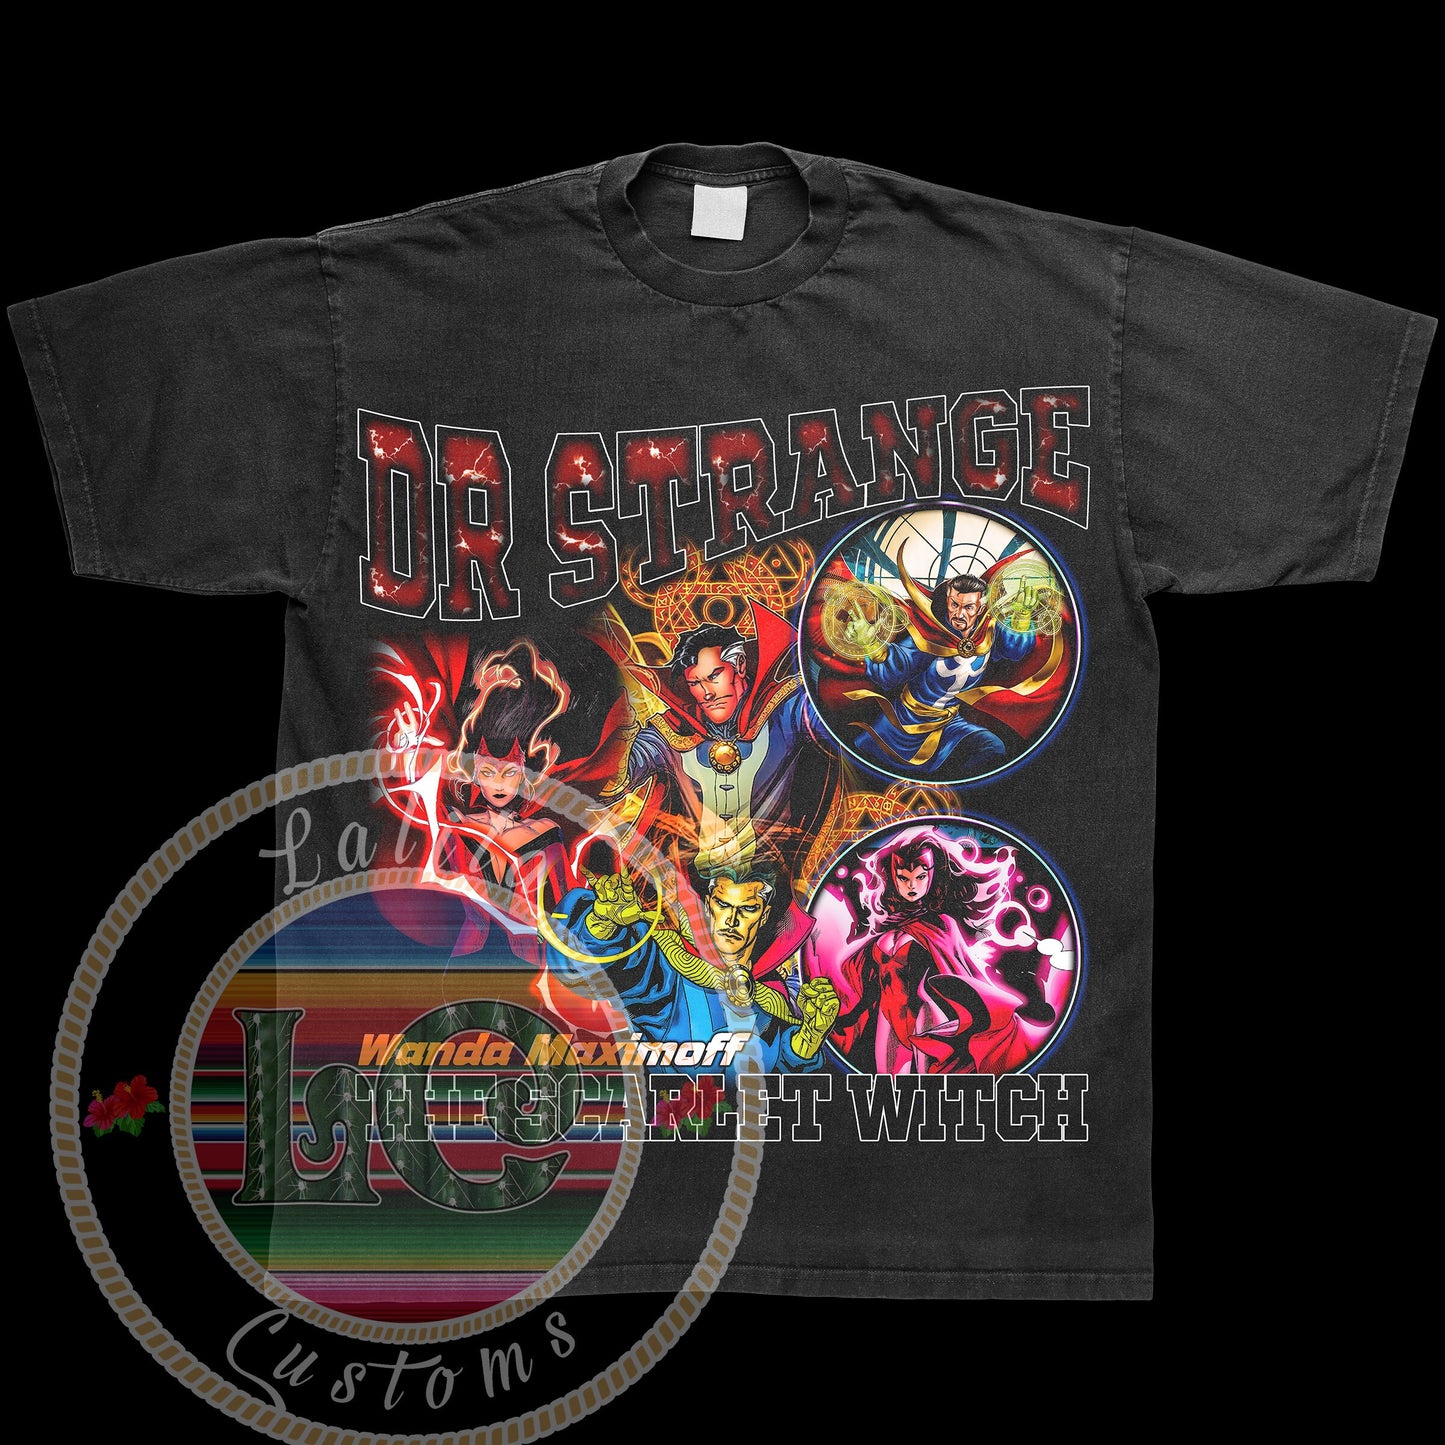 Dr. Strange and The Scarlet Witch "Multiverse of Madness" Tee